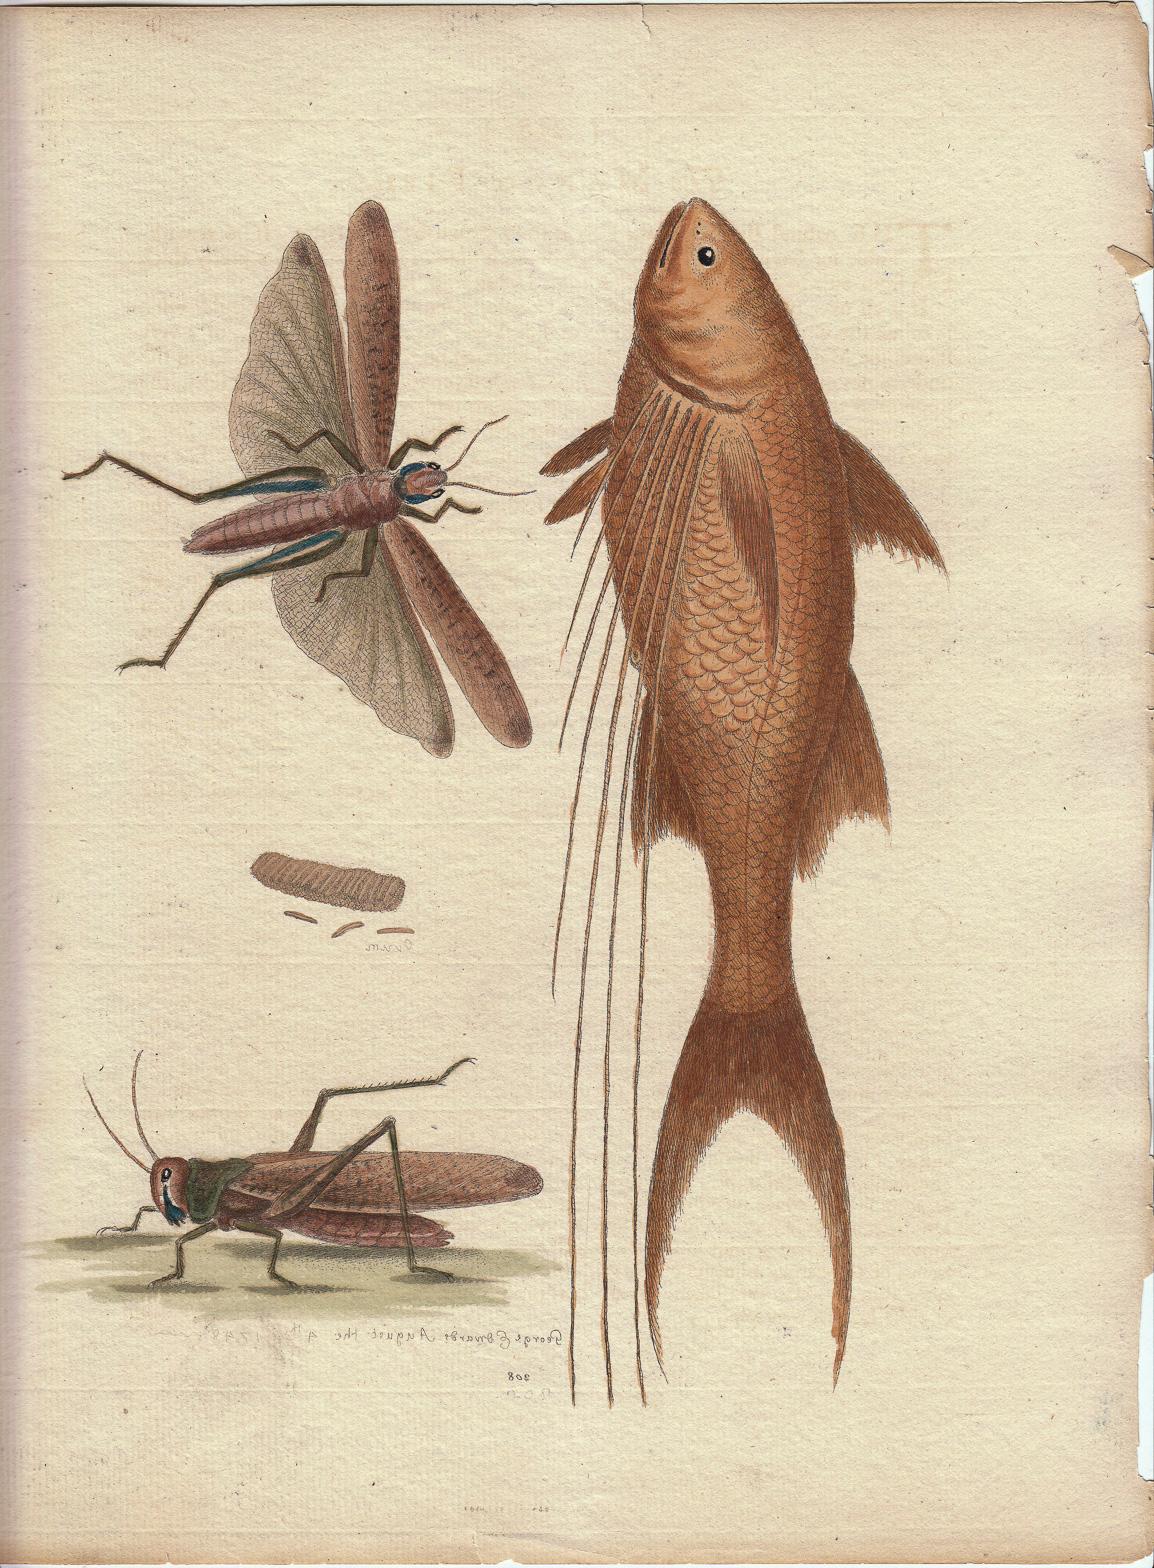 George Edwards Animal Print - Vintage Print, Grasshopper, Fish,  "A Natural History of Uncommon Birds..." 